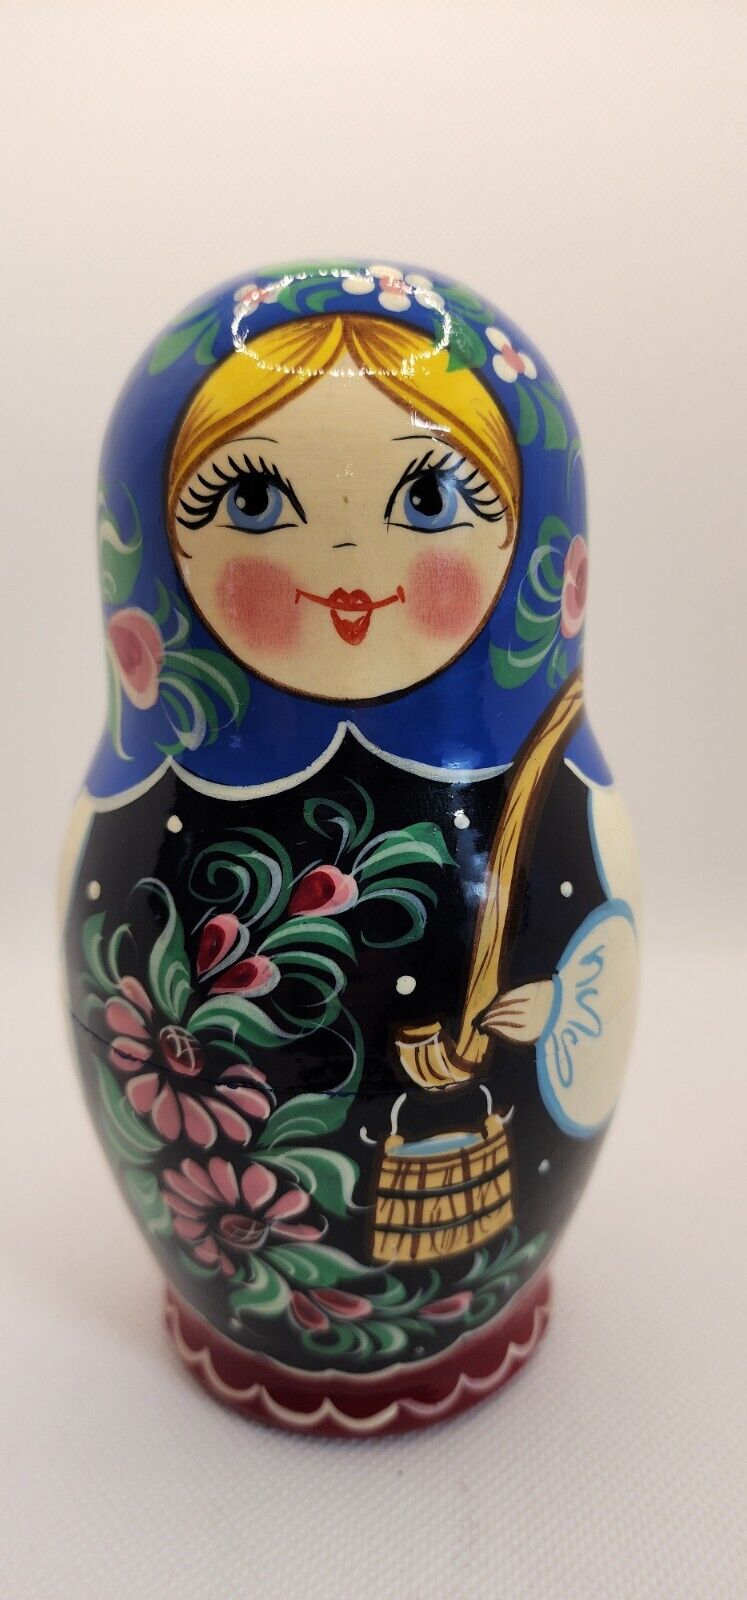 Authentic Hand Painted Nesting Russian Doll Signed By Artist